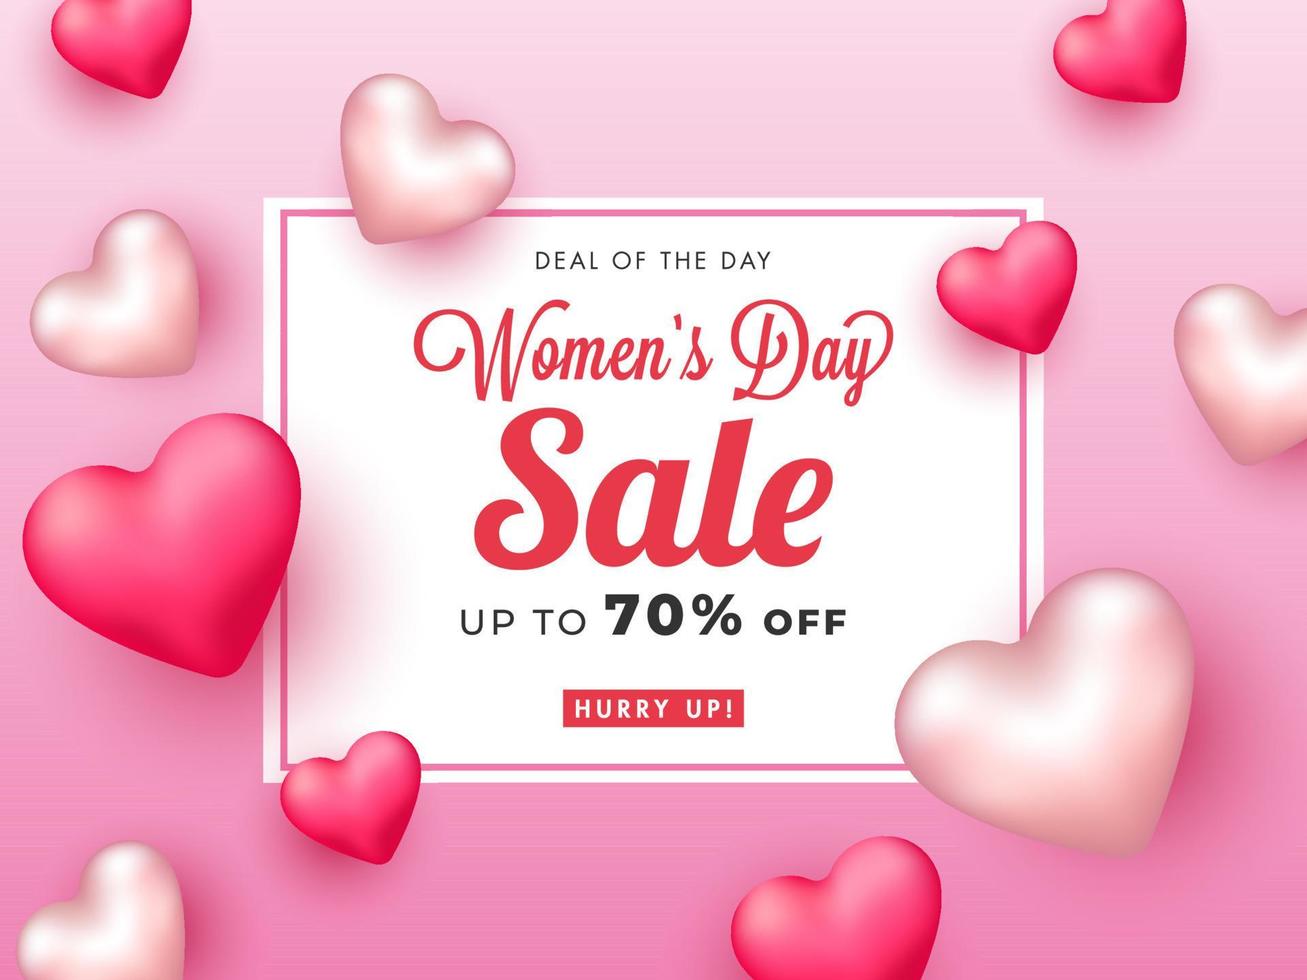 Women's Day Sale Poster Design with 3D Glossy Hearts. vector